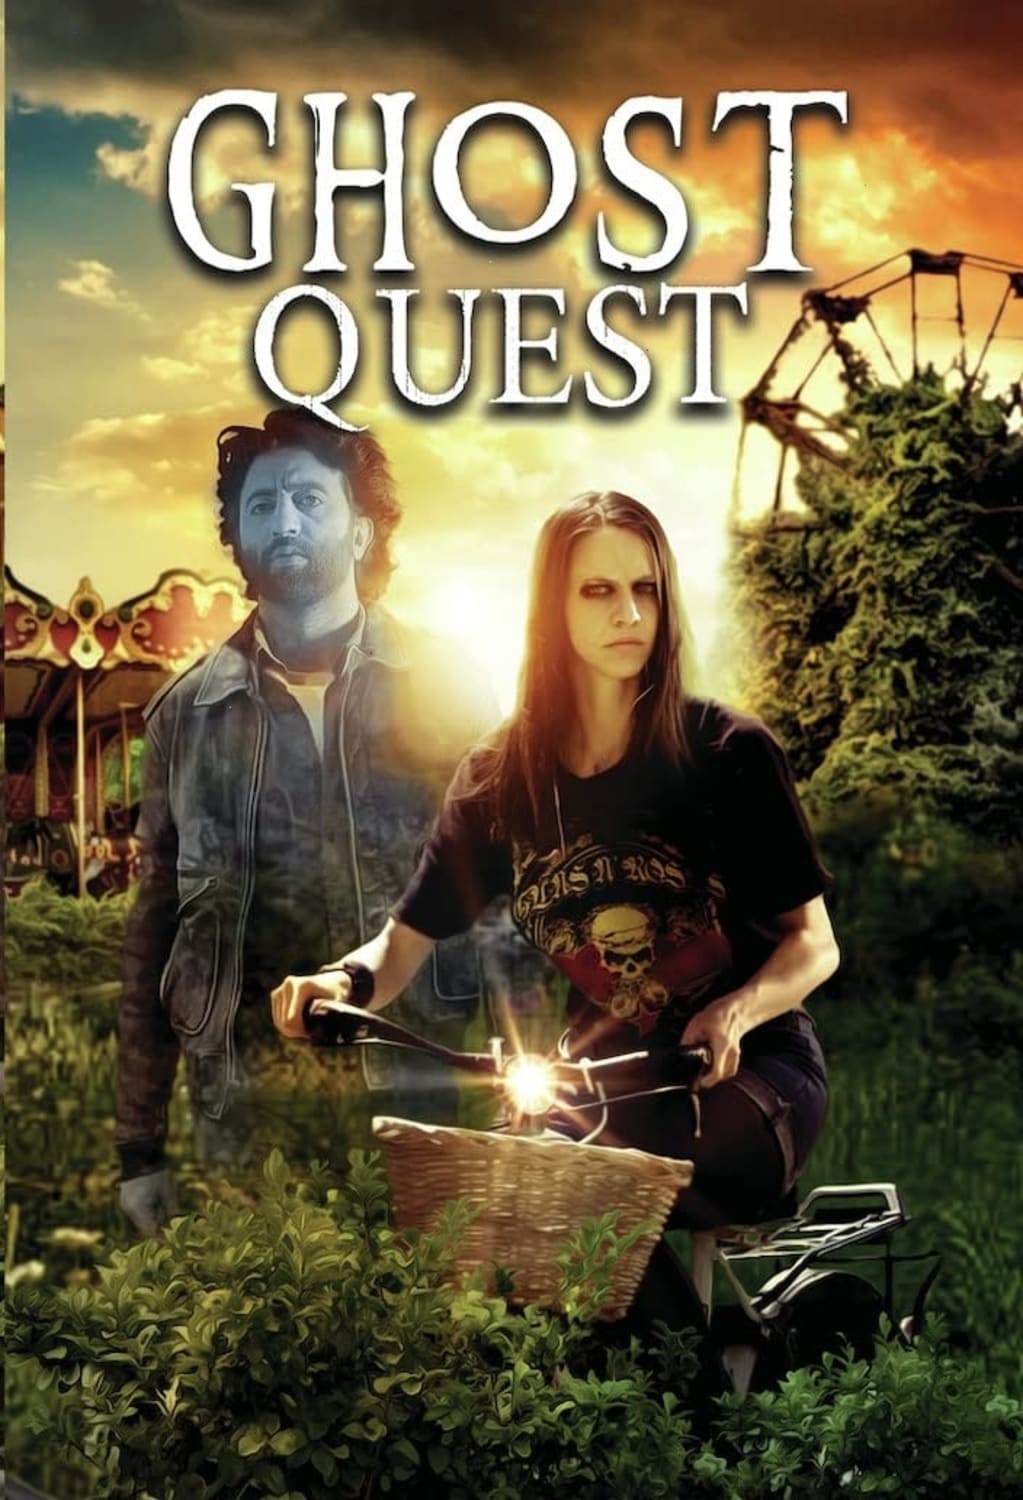 GHOST QUEST on MovieShack